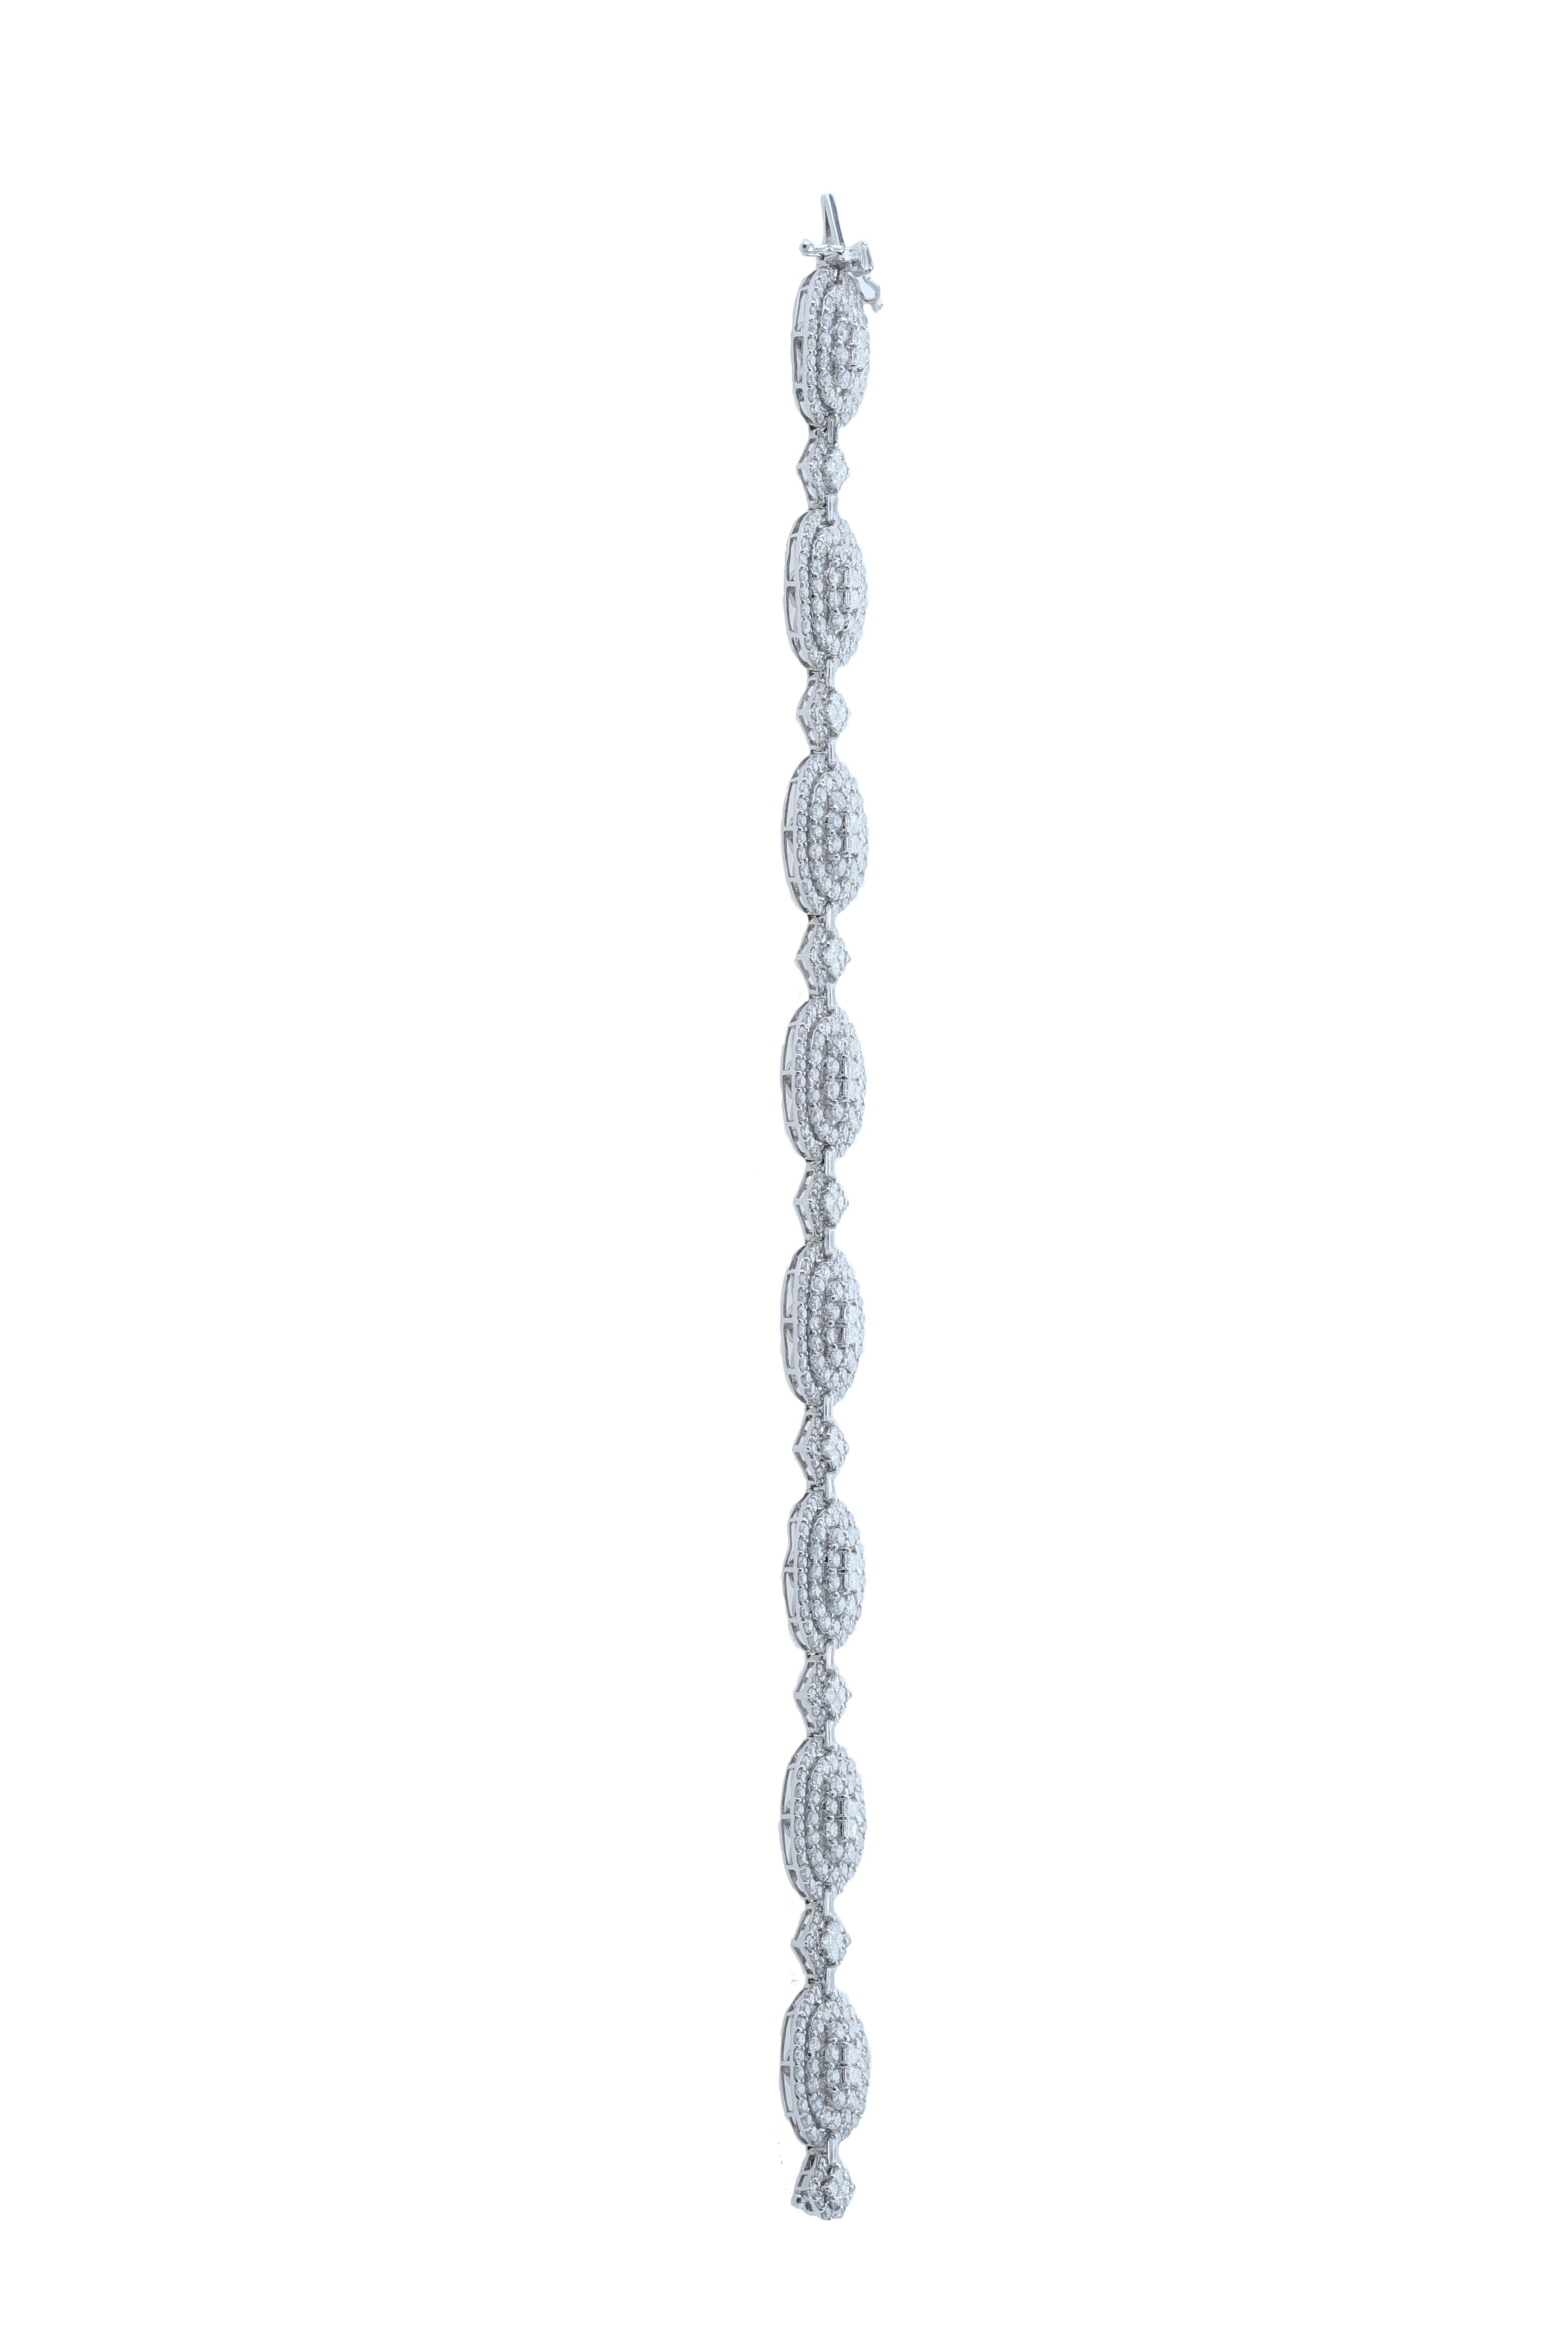 A Cascade of Diamonds, this white diamond bracelet carries an inspirational design , featuring round solitaires that is surrounded by mesmerizing round diamonds. 
	
Diamond Clarity:  SI / G H COLOR
Diamonds (Total Carat Weight: 10.63 ct) 
18 Karat